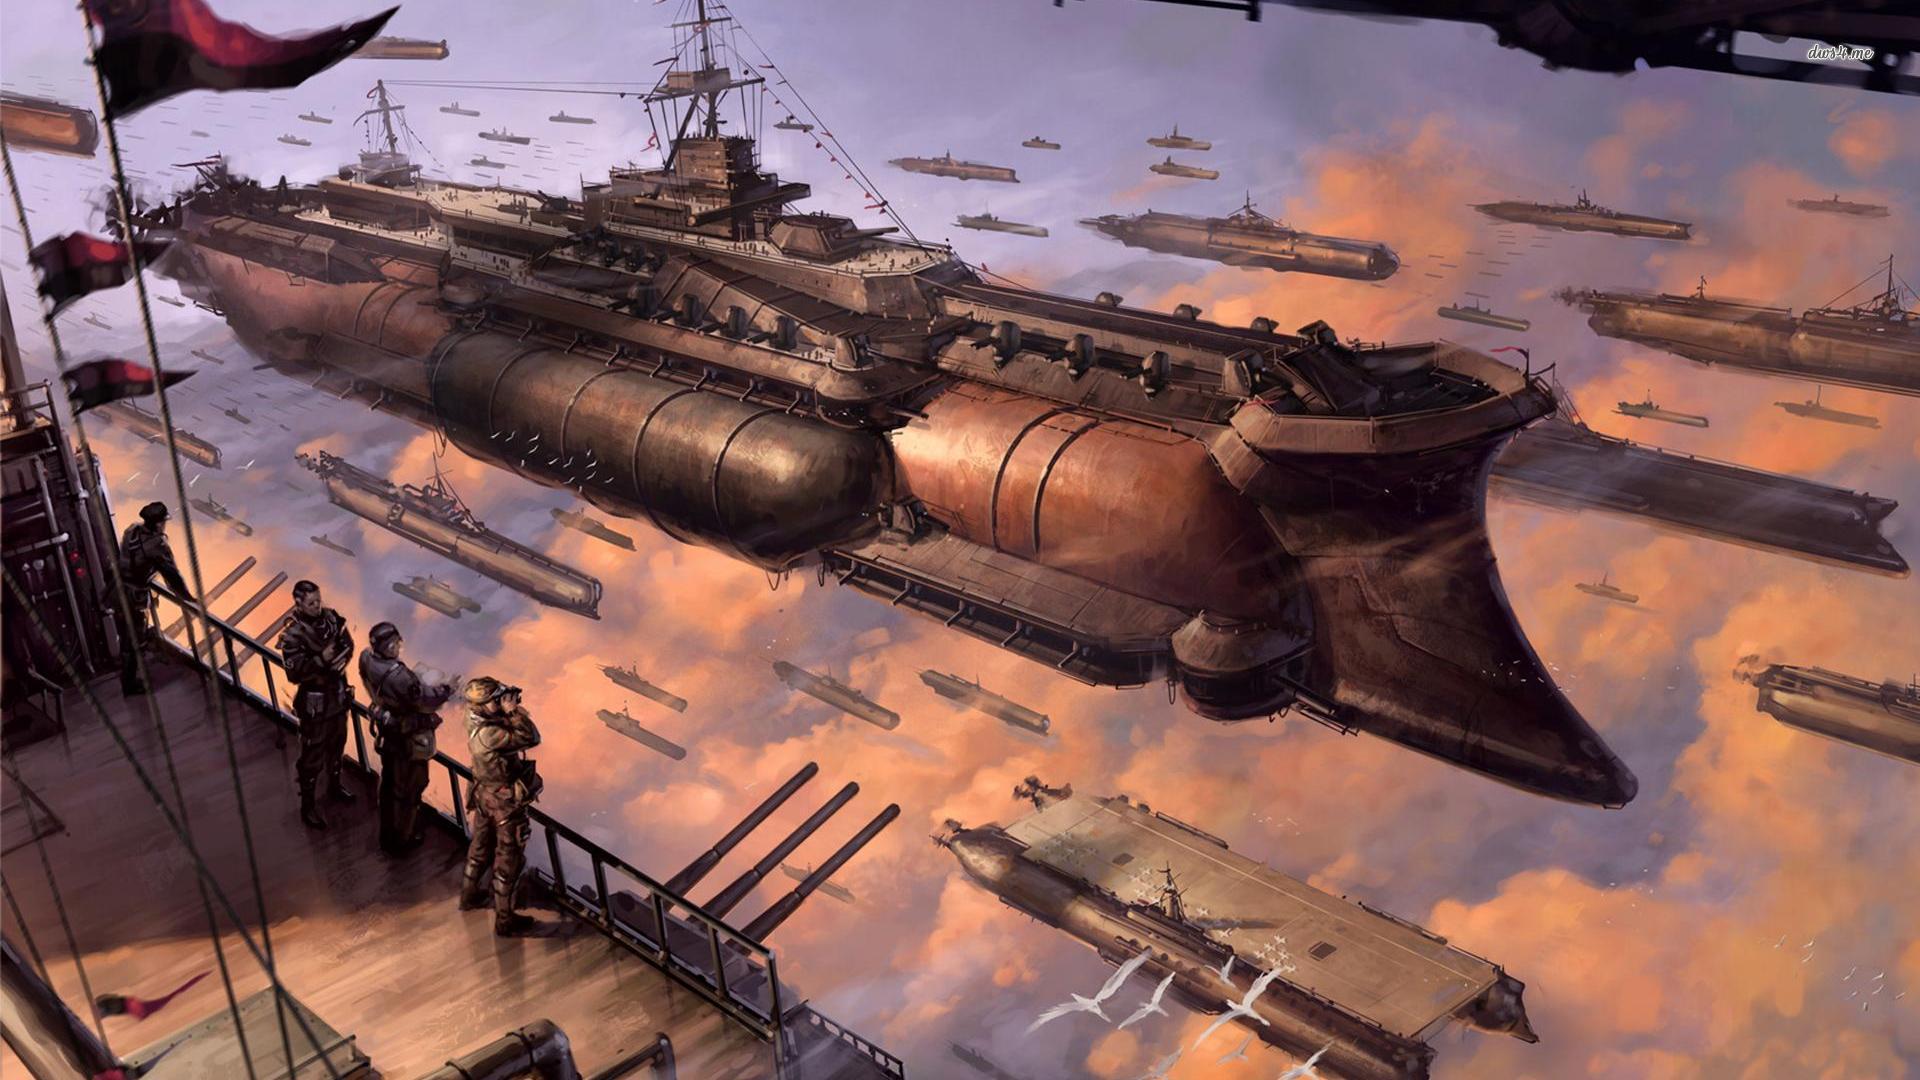 Steampunk Wallpapers 1920x1080 - Wallpaper Cave